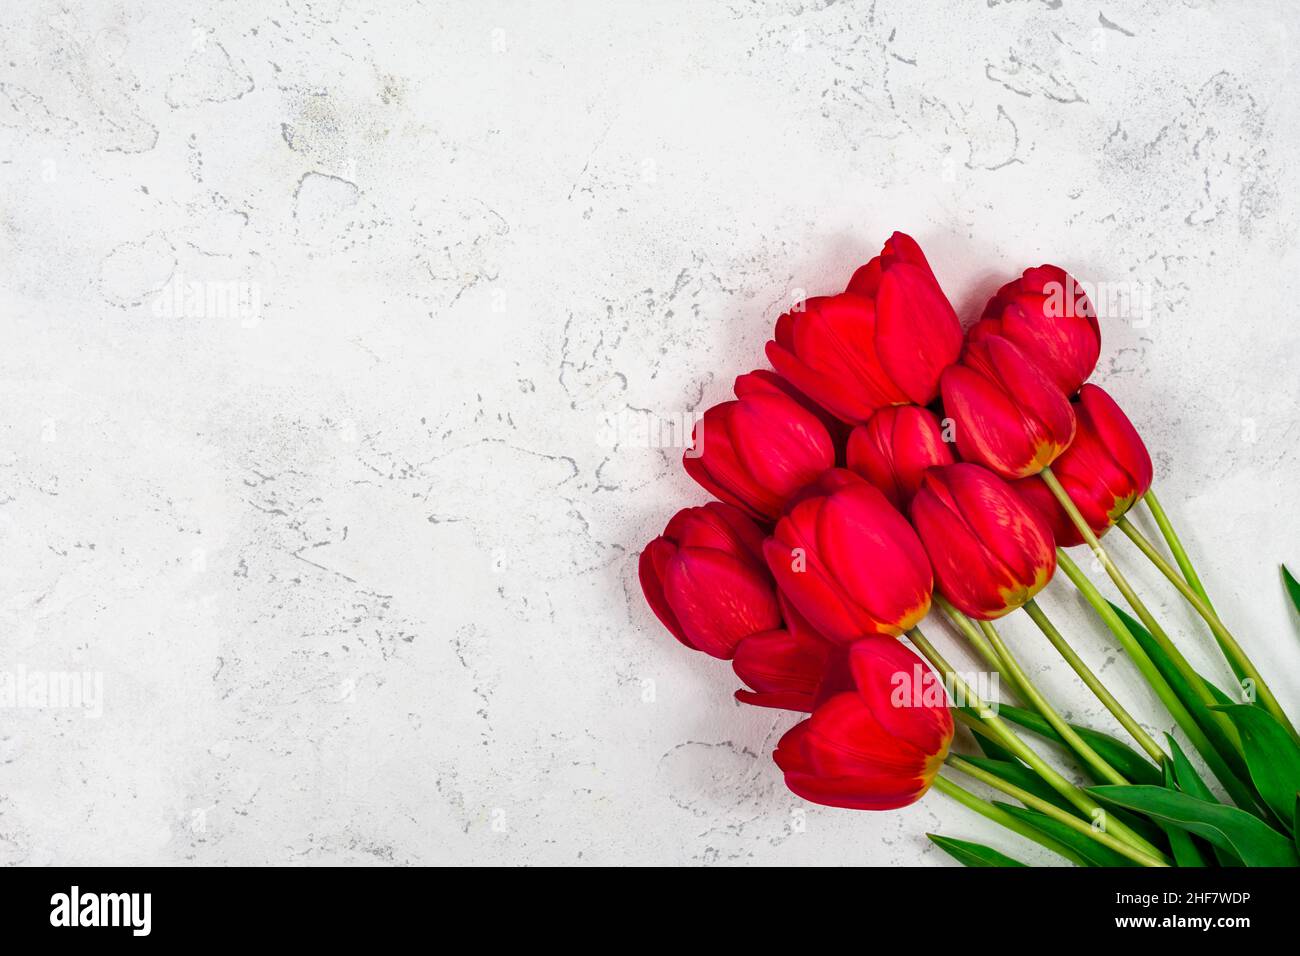 Red tulips on a white concrete background. Mothers Day. March 8. Place for an inscription. The basis for the postcard. View from above. Stock Photo